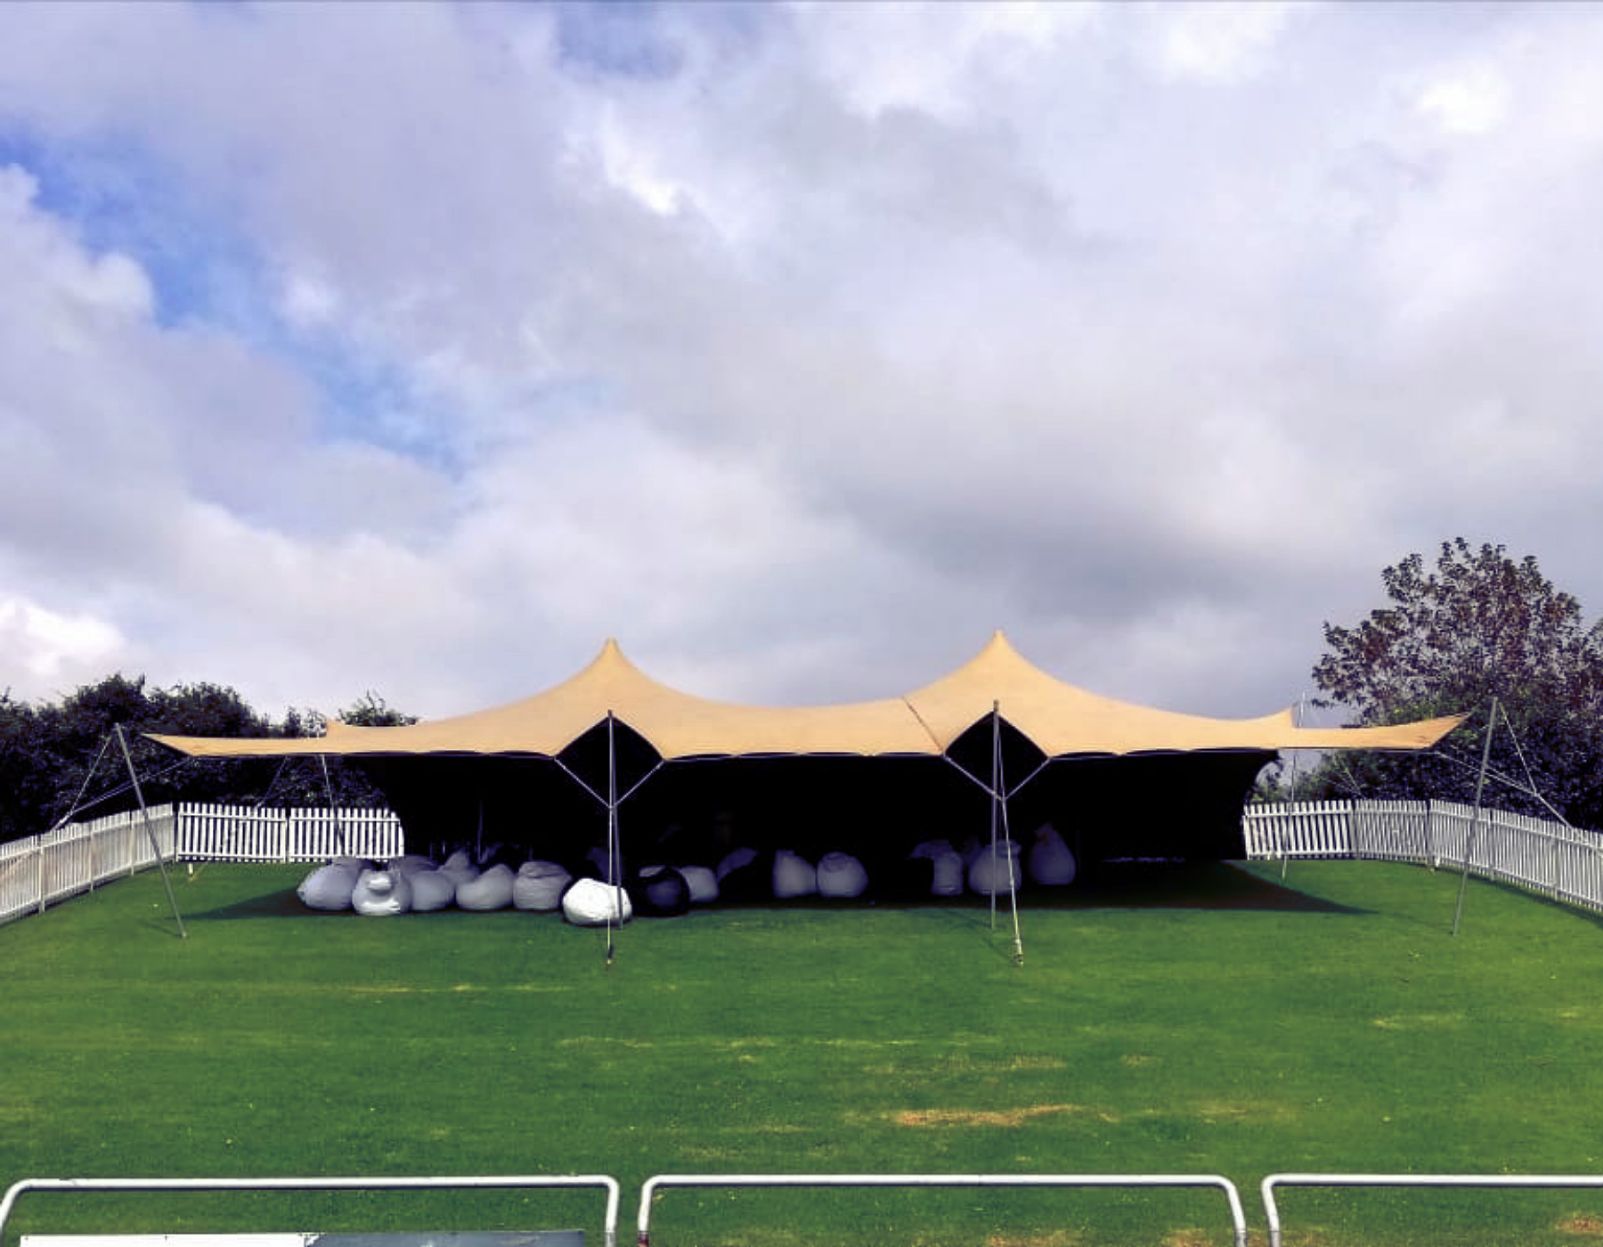 Stretch Tent With Beanbags Underneath And White Picket Fence.